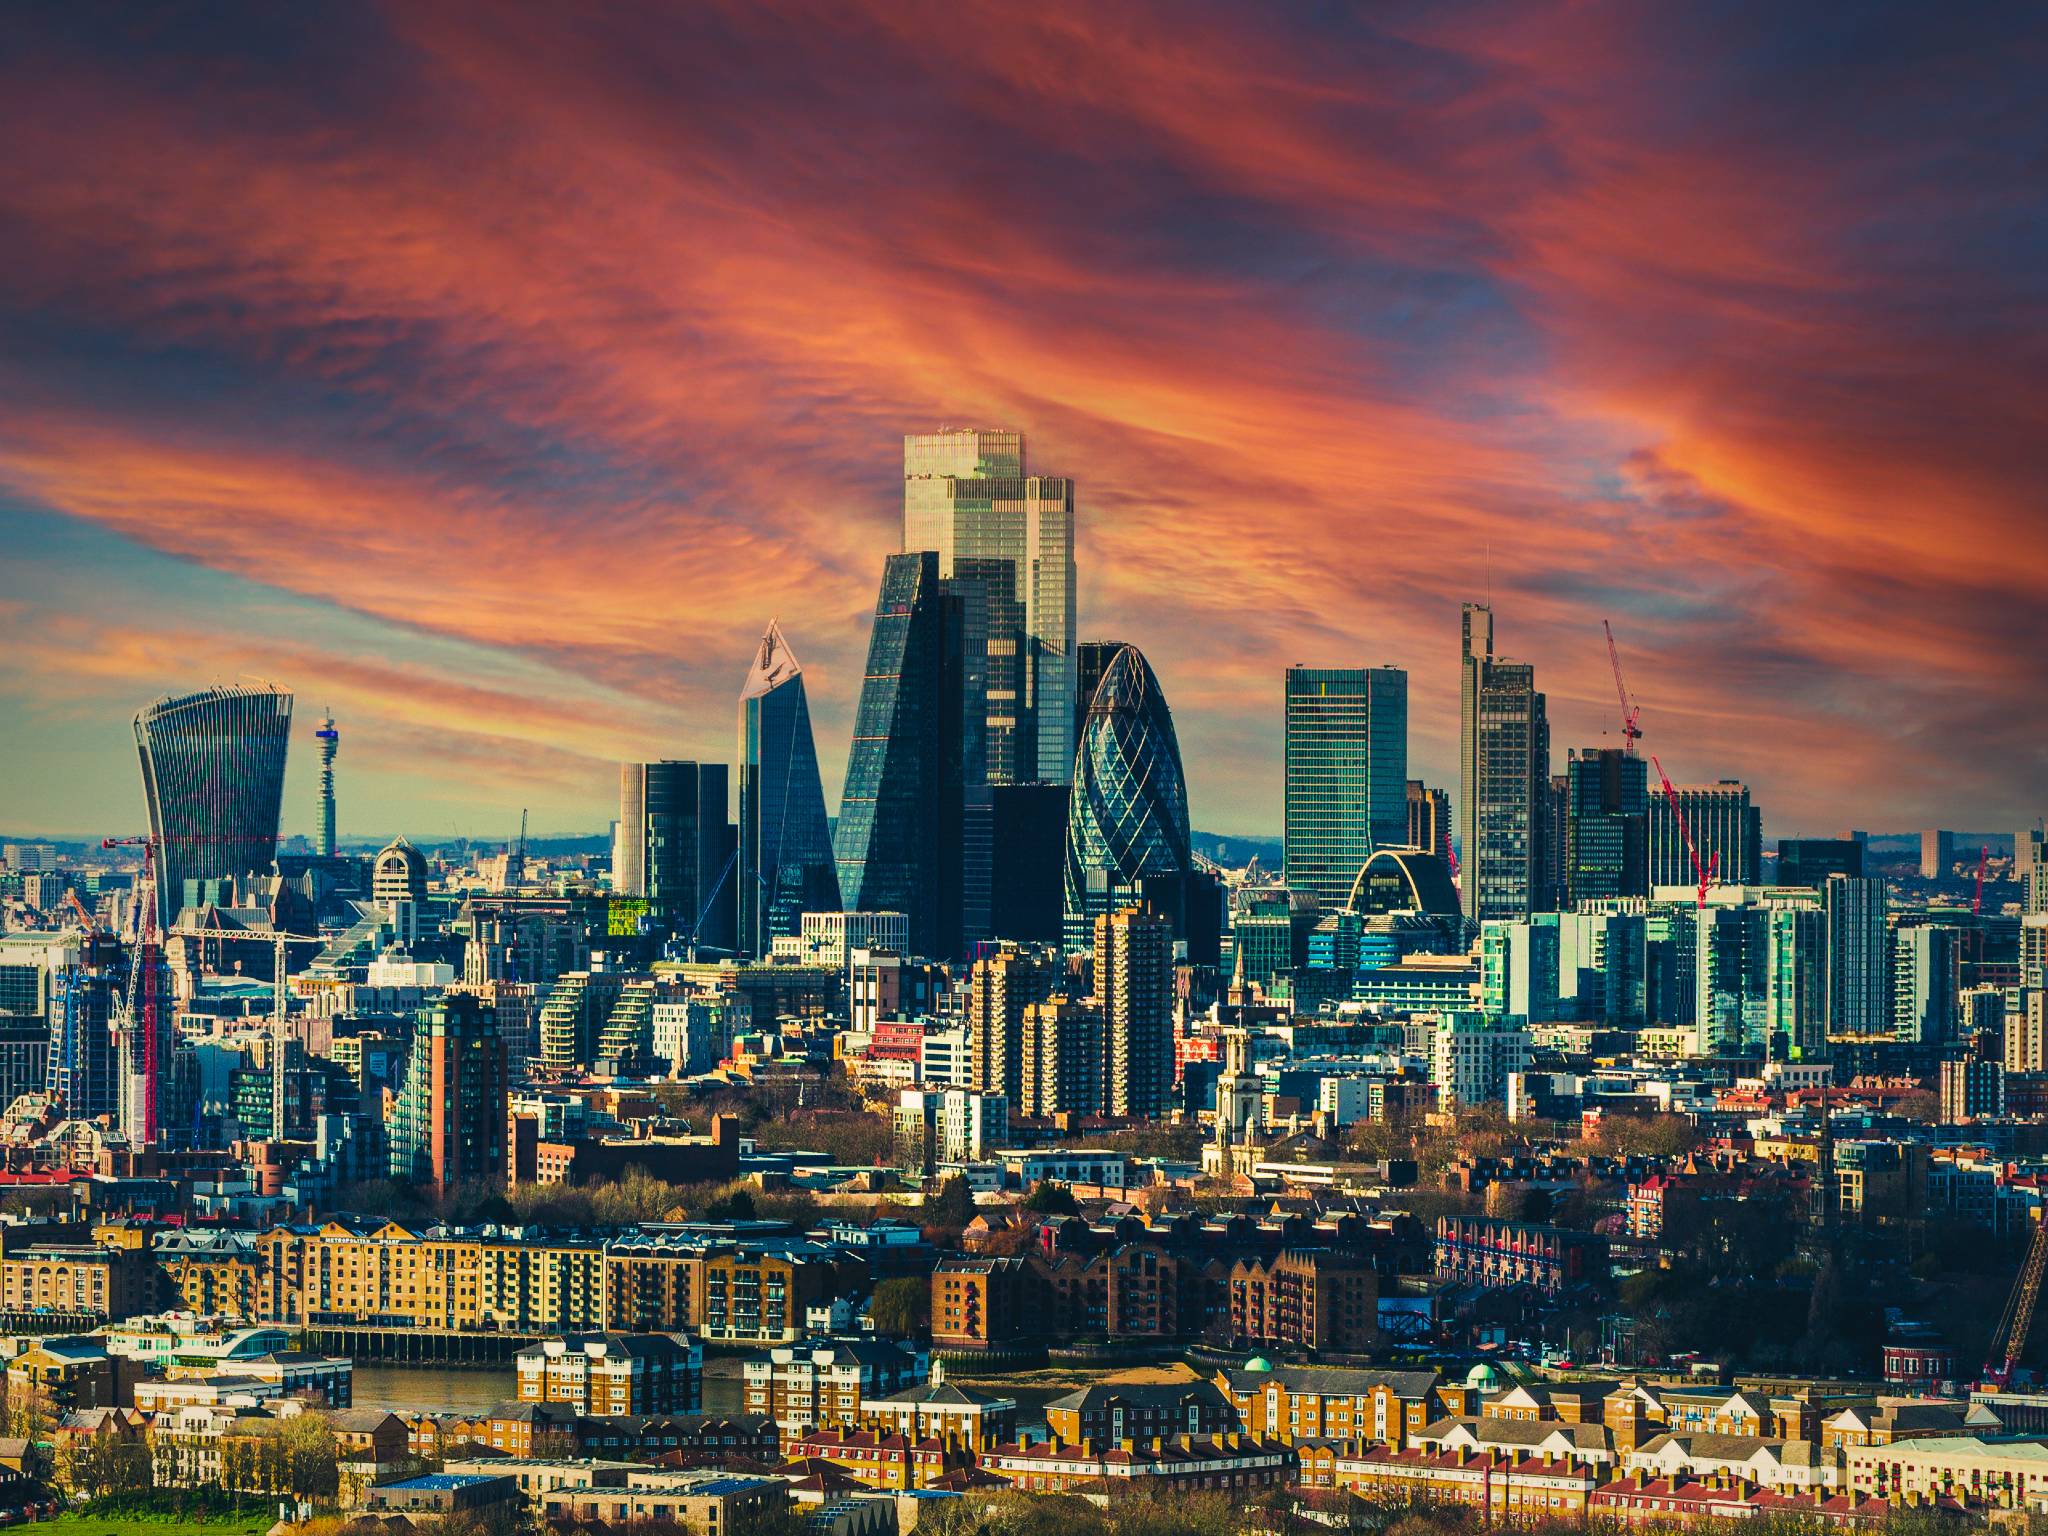 This is a story about London’s future as a financial centre